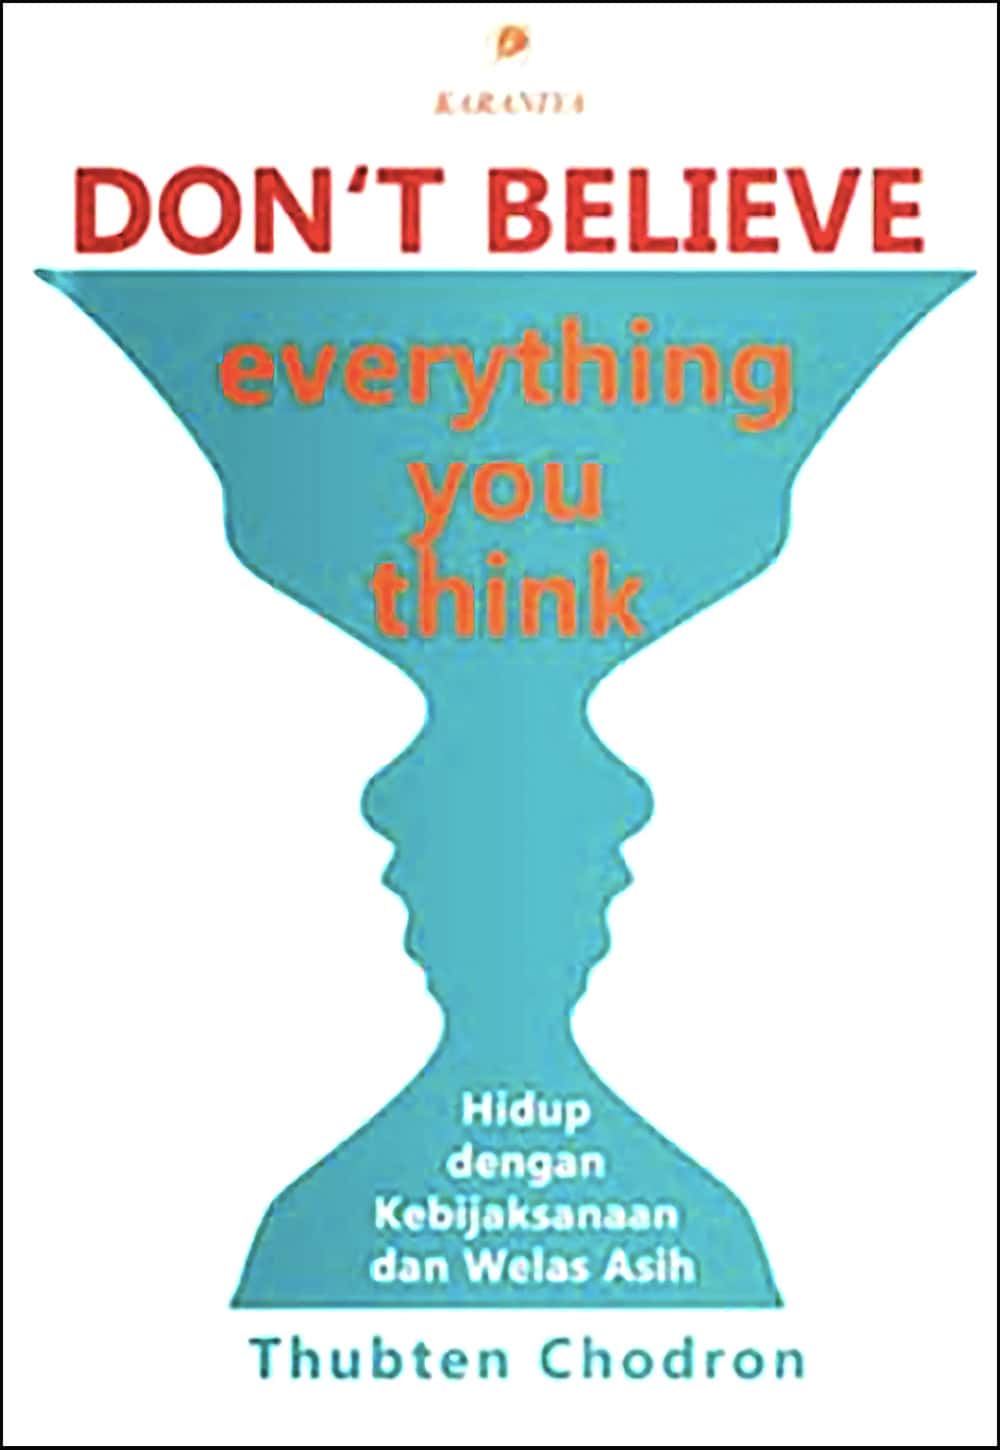 Cover of Bahasa Indonesia translation of "Don't Believe Everything You Think"